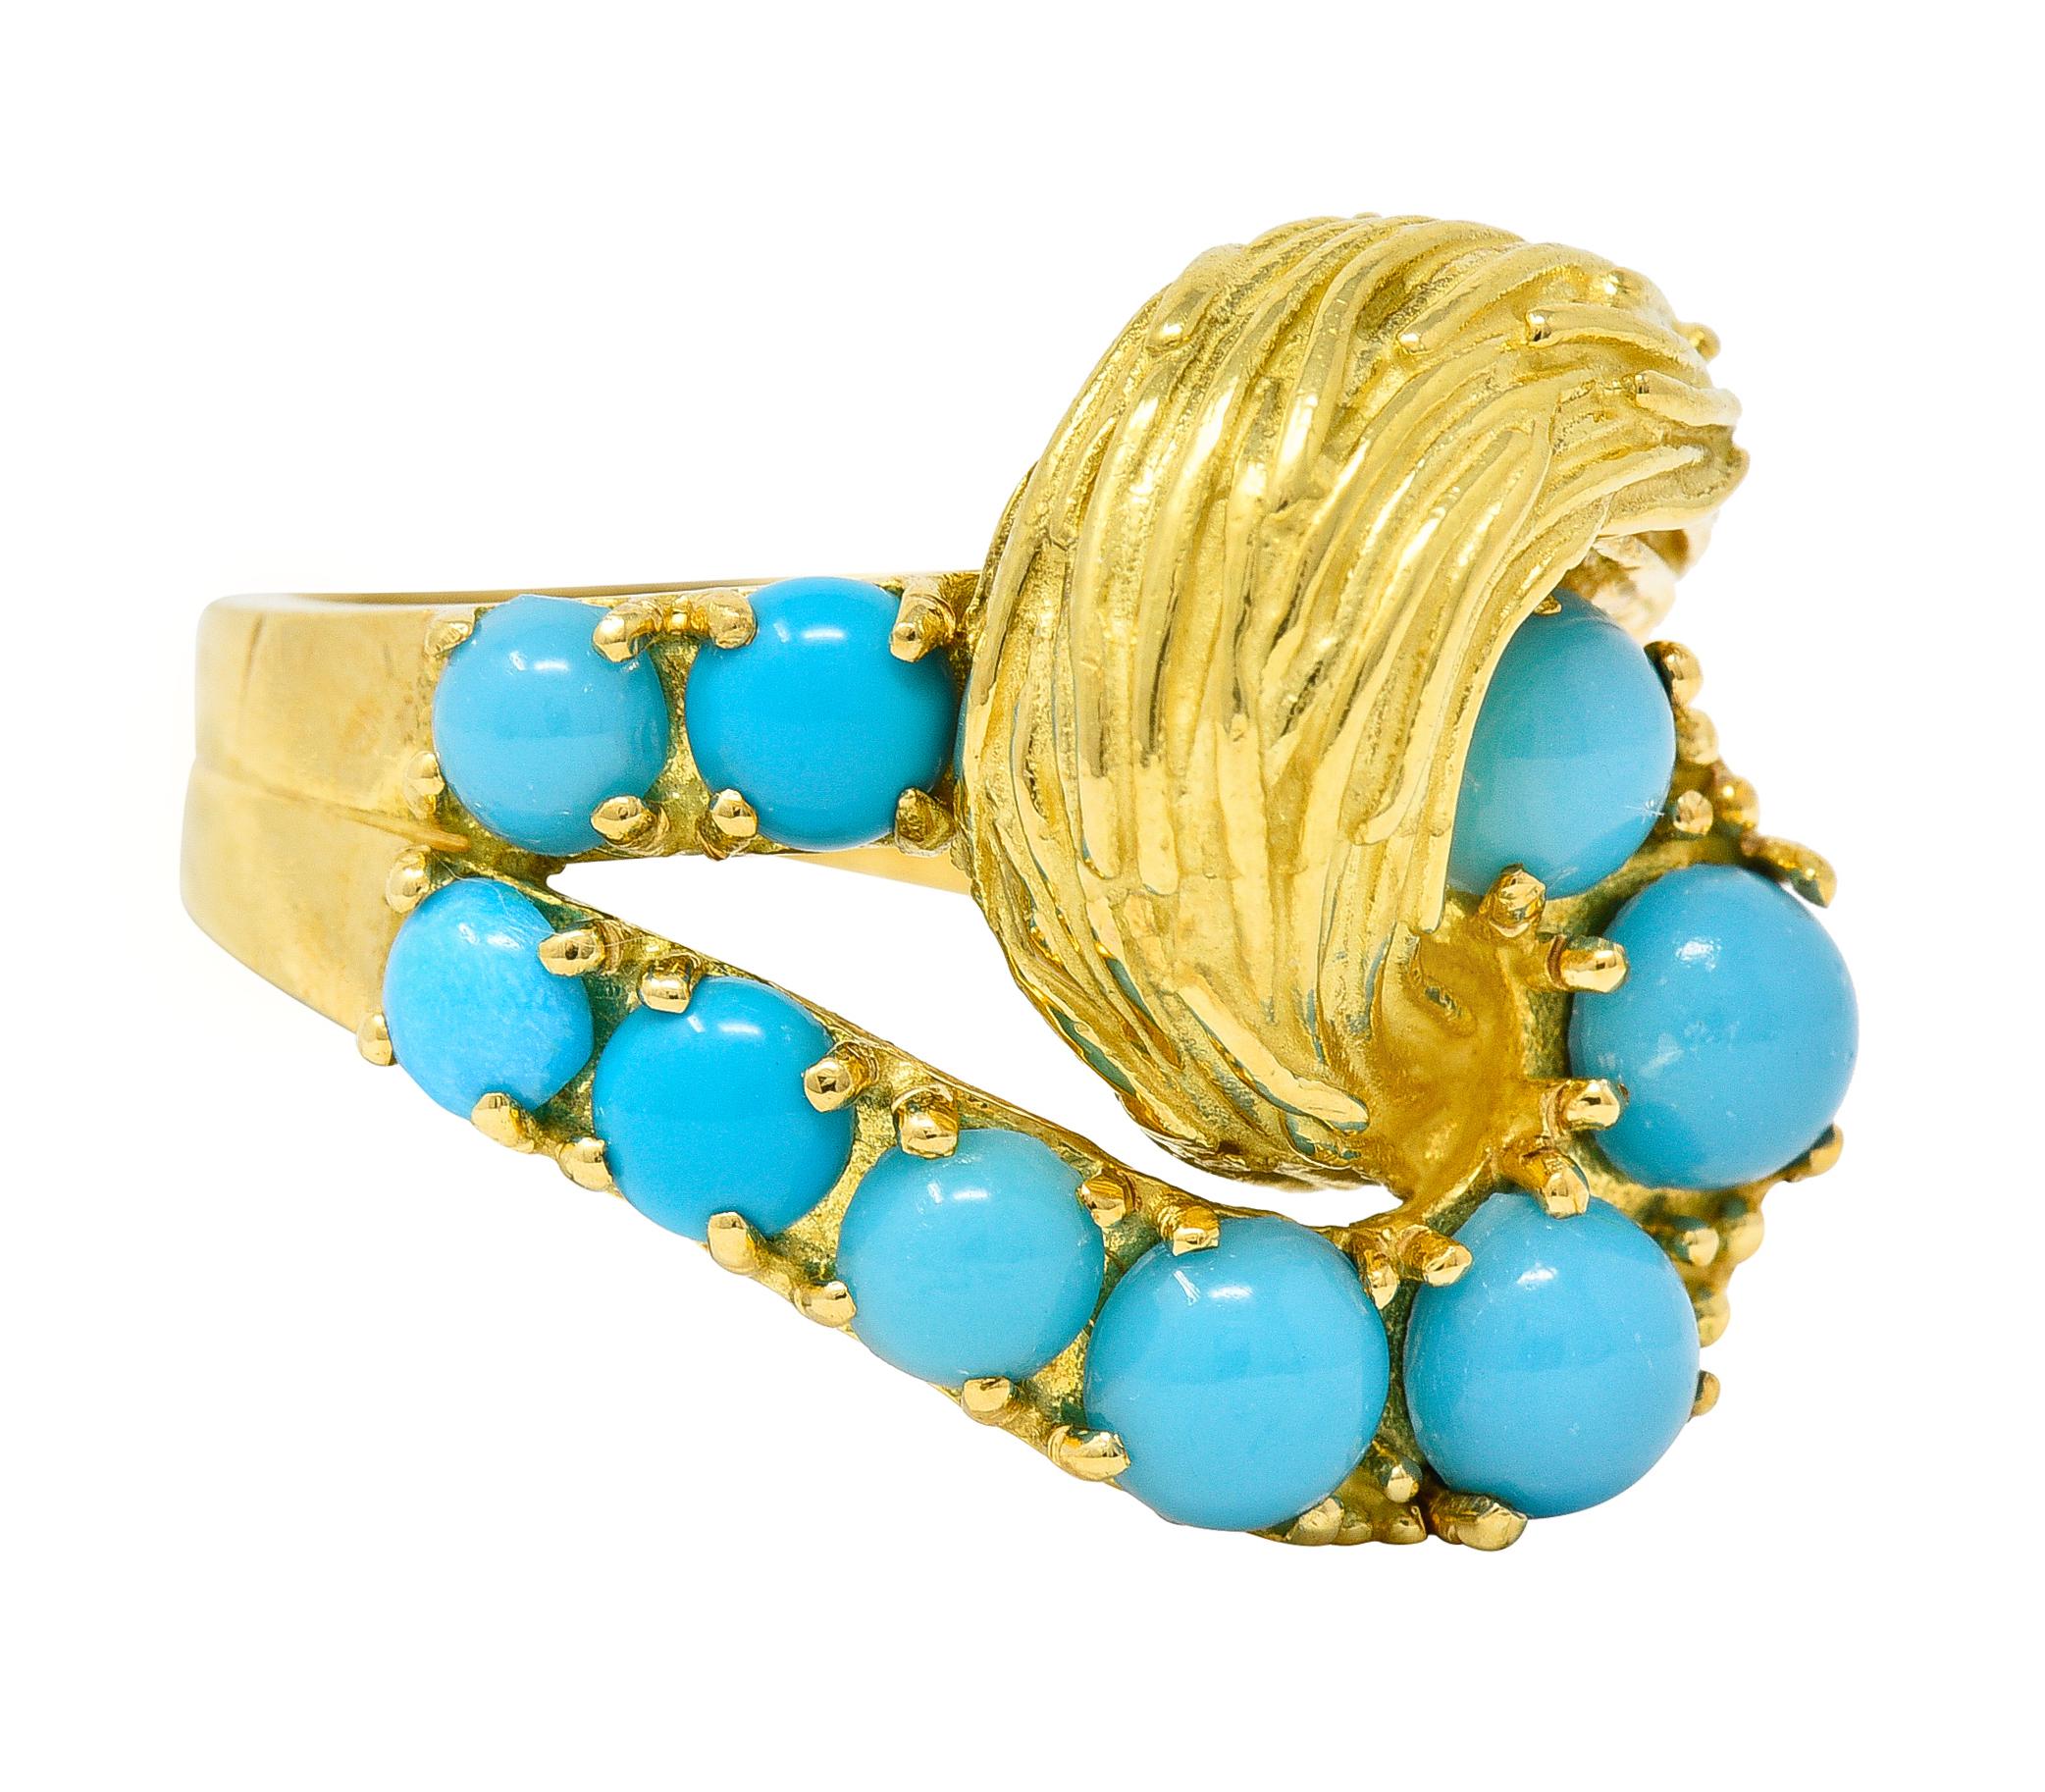 Designed with entwined looping terminals - one features graduated prong set turquoise cabochons
Ranging in size from 3.0 to 5.0 mm round - opaque light to medium robin's egg blue in color
The other terminal consists of deeply grooved textured